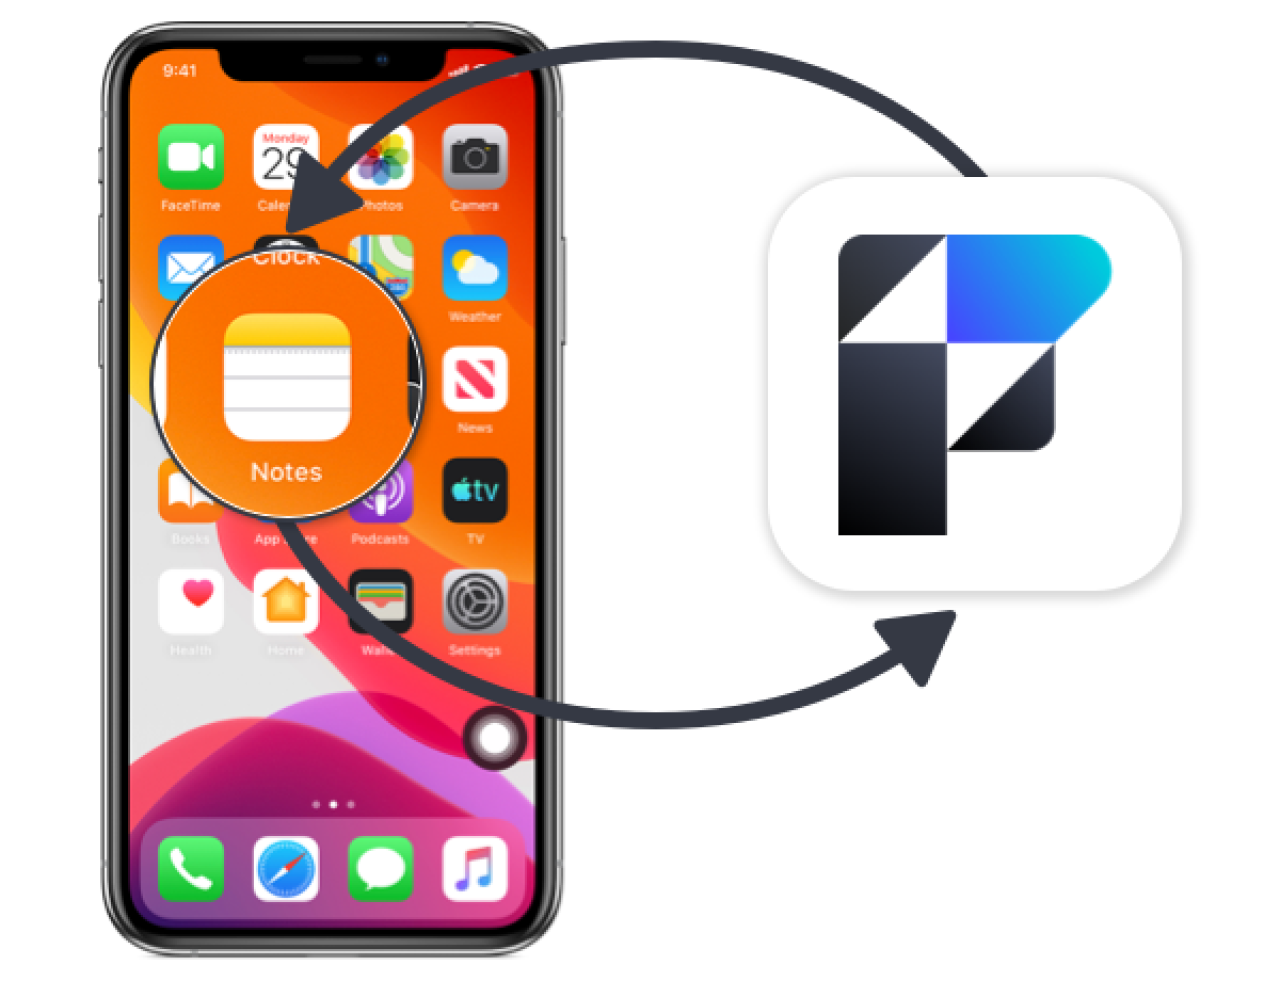 communicating with mobile apps via filemaker go.